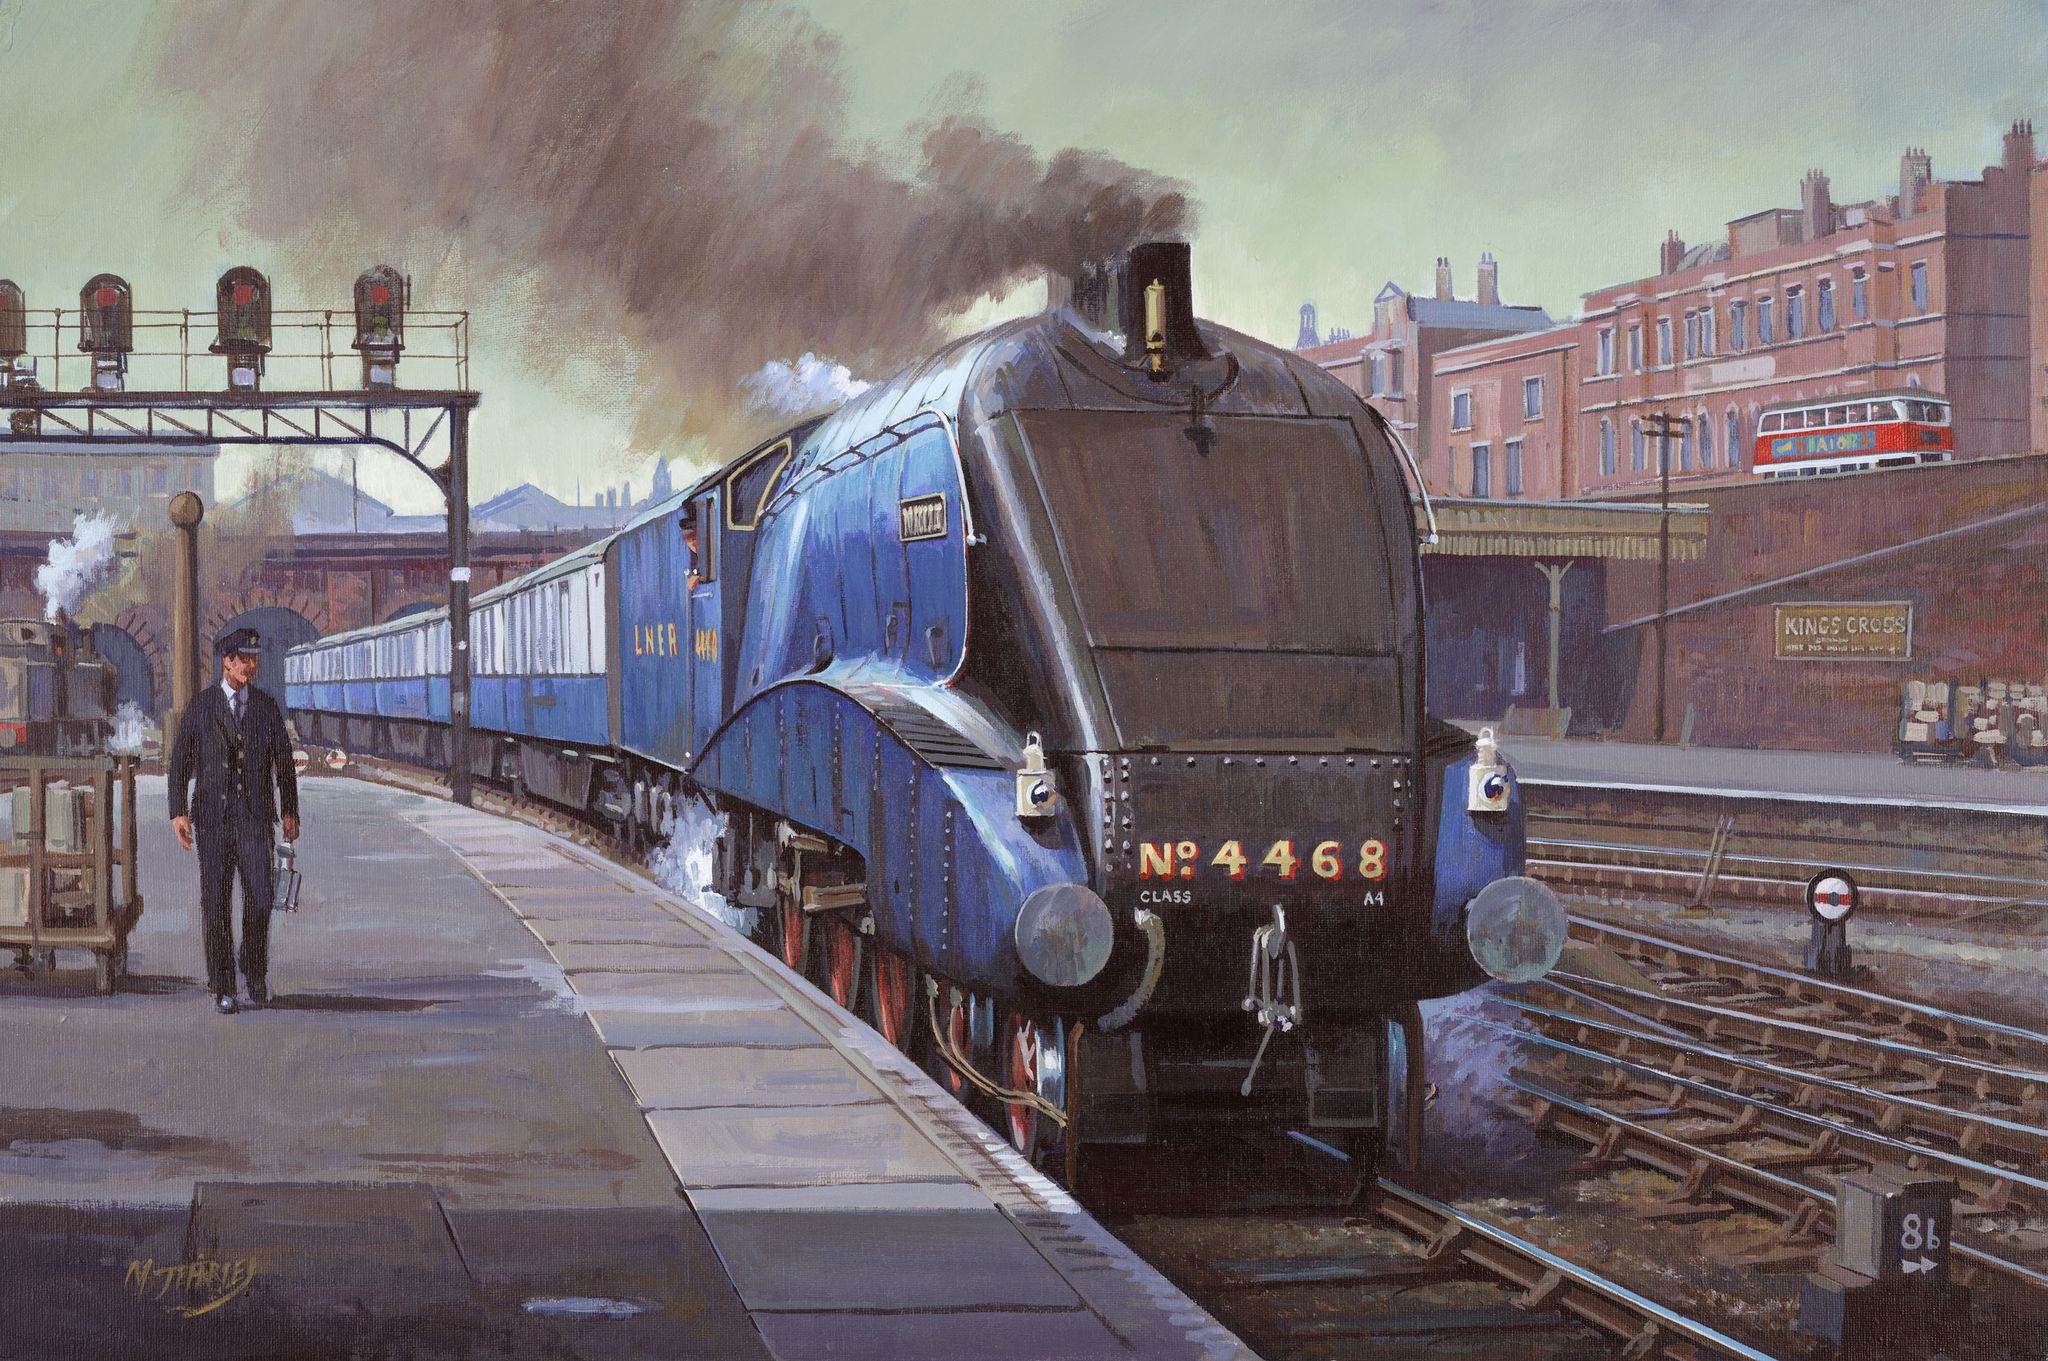 england   june 09  oil painting by mike jeffries of 2004 the a4 pacific class mallard was designed by sir nigel gresley 1876 1941, the chief engineer of the london  north eastern railway lner on sunday 3 july 1938, the 4 6 2 locomotive reached a speed of 126 mph 203 kph on a straight stretch of track between grantham and peterborough, achieving a new world speed record for steam locomotives which remains unbroken to this day  photo by ssplgetty images